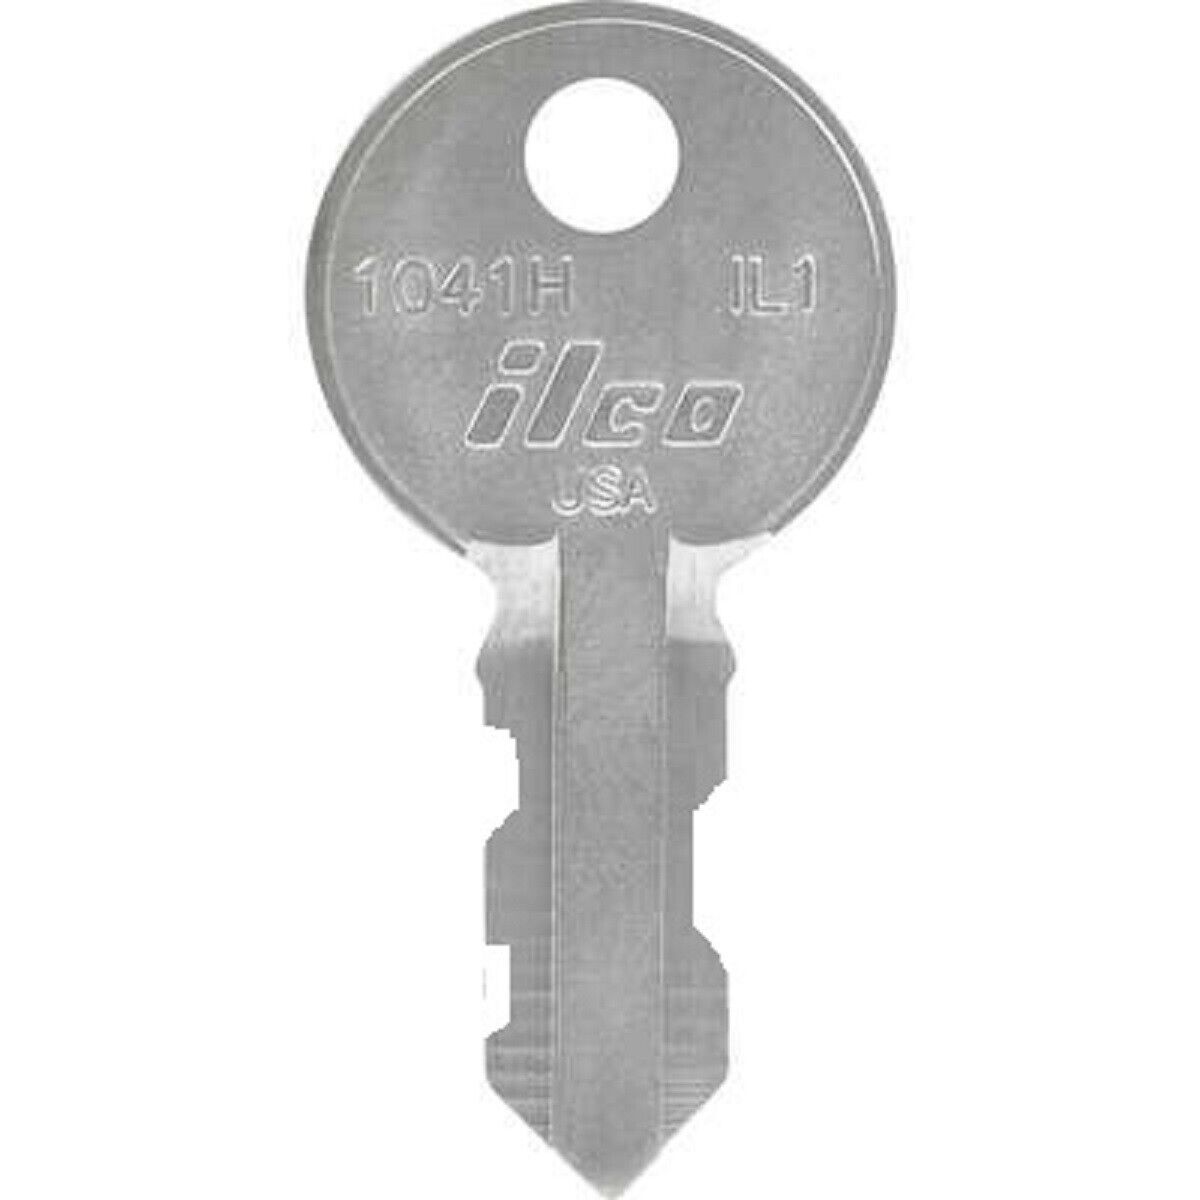 Honeywell, Guard & Classic Thermostat Co Replacement Key Made By Gkeez